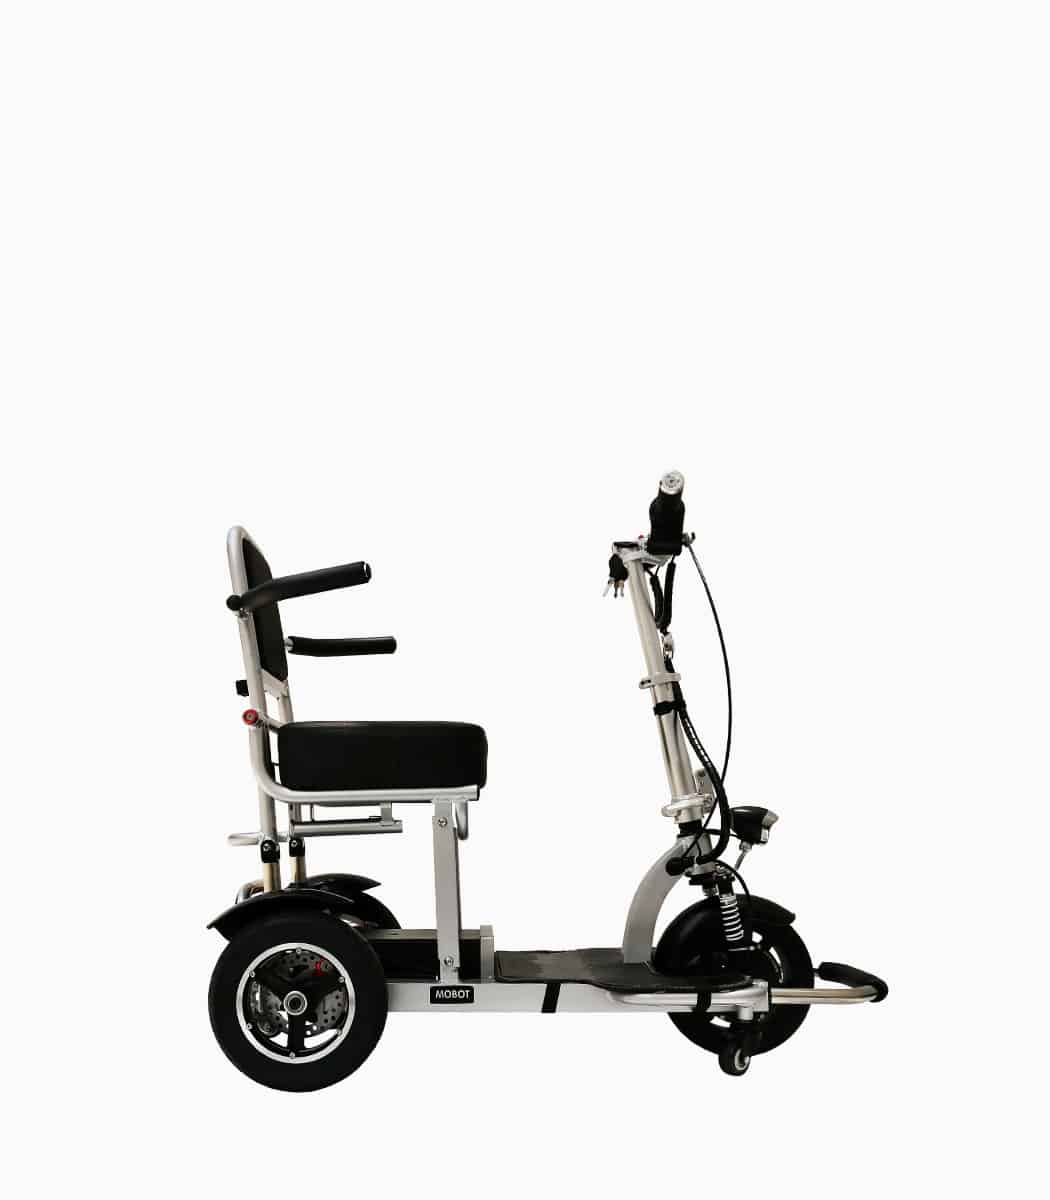 MOBOT FLEXI TITAN (BLACK12AH) 3 wheels mobility scooter right V1